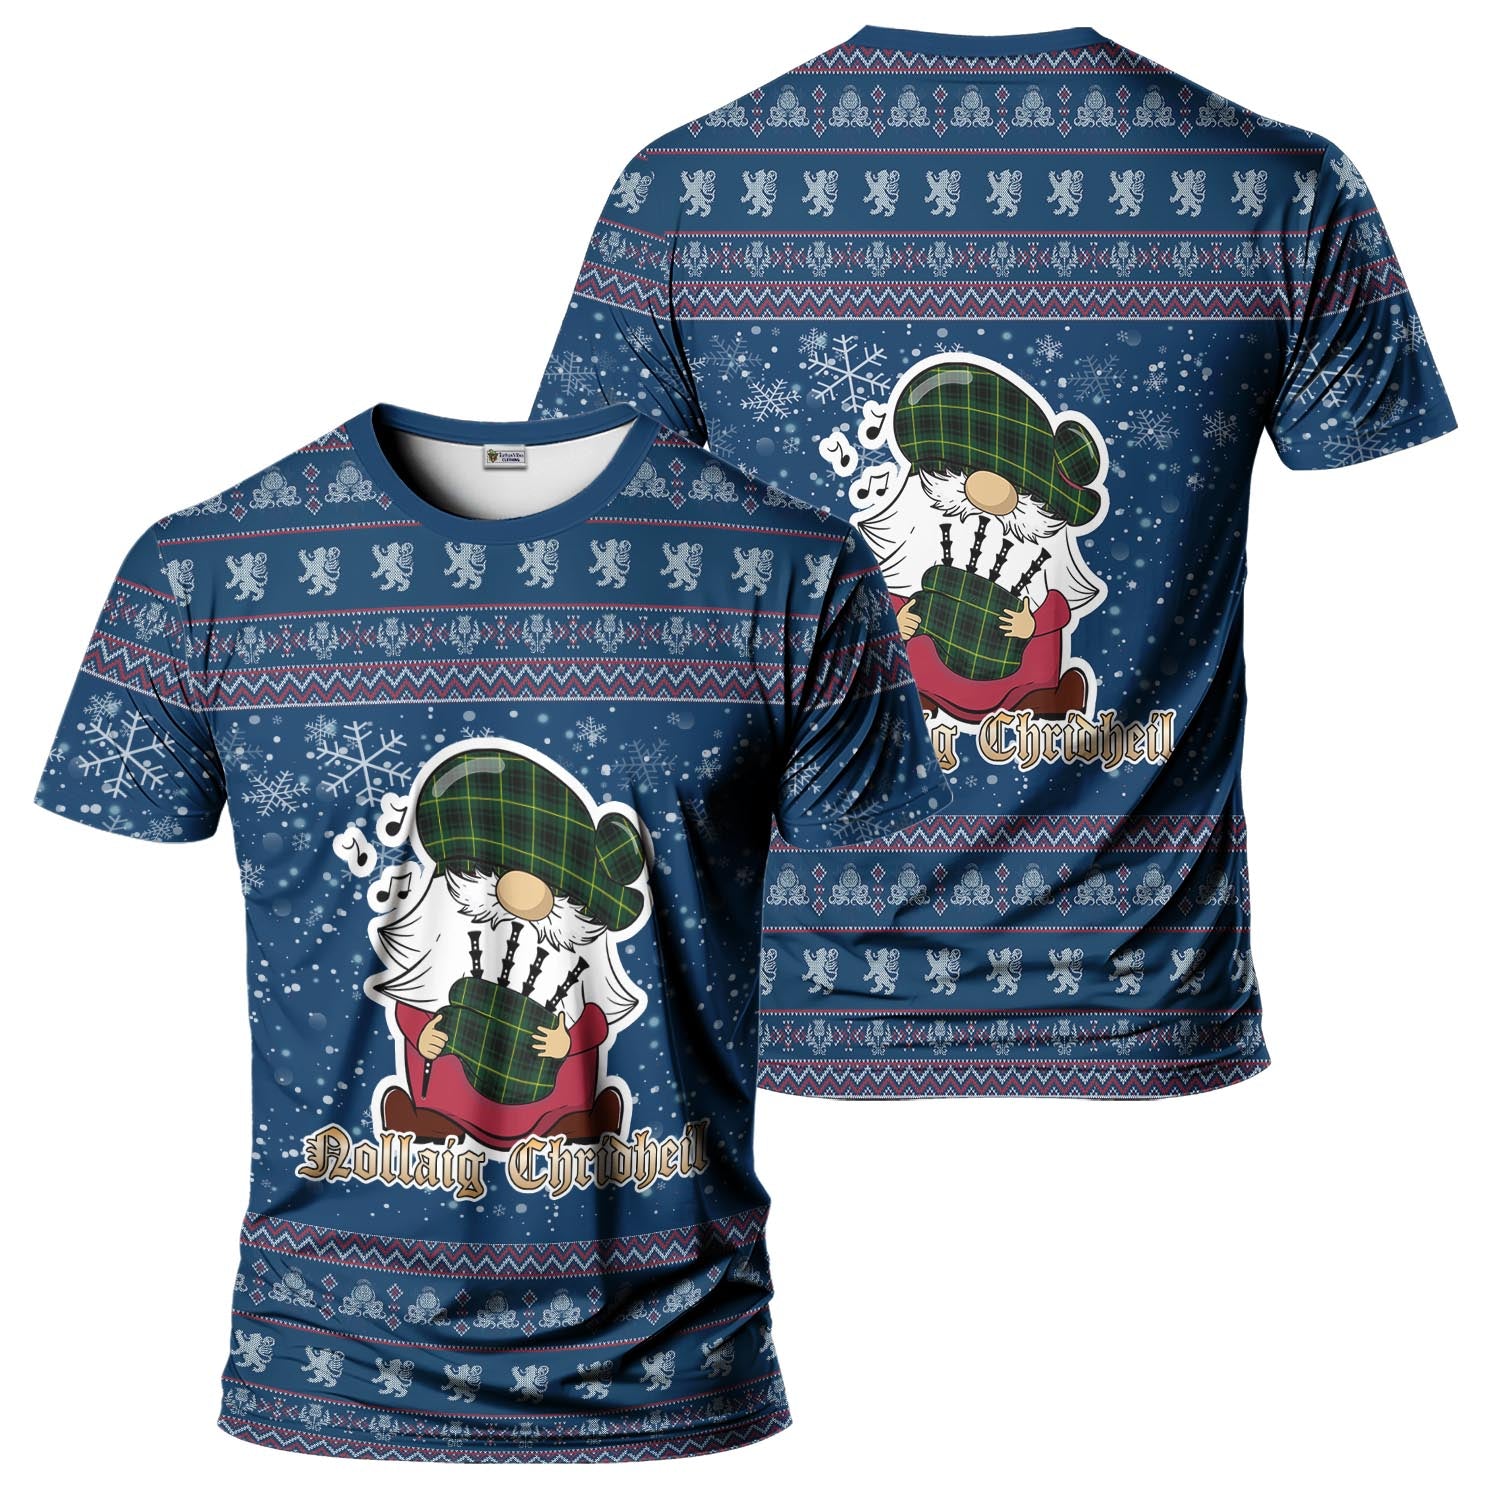 MacArthur Modern Clan Christmas Family T-Shirt with Funny Gnome Playing Bagpipes Kid's Shirt Blue - Tartanvibesclothing